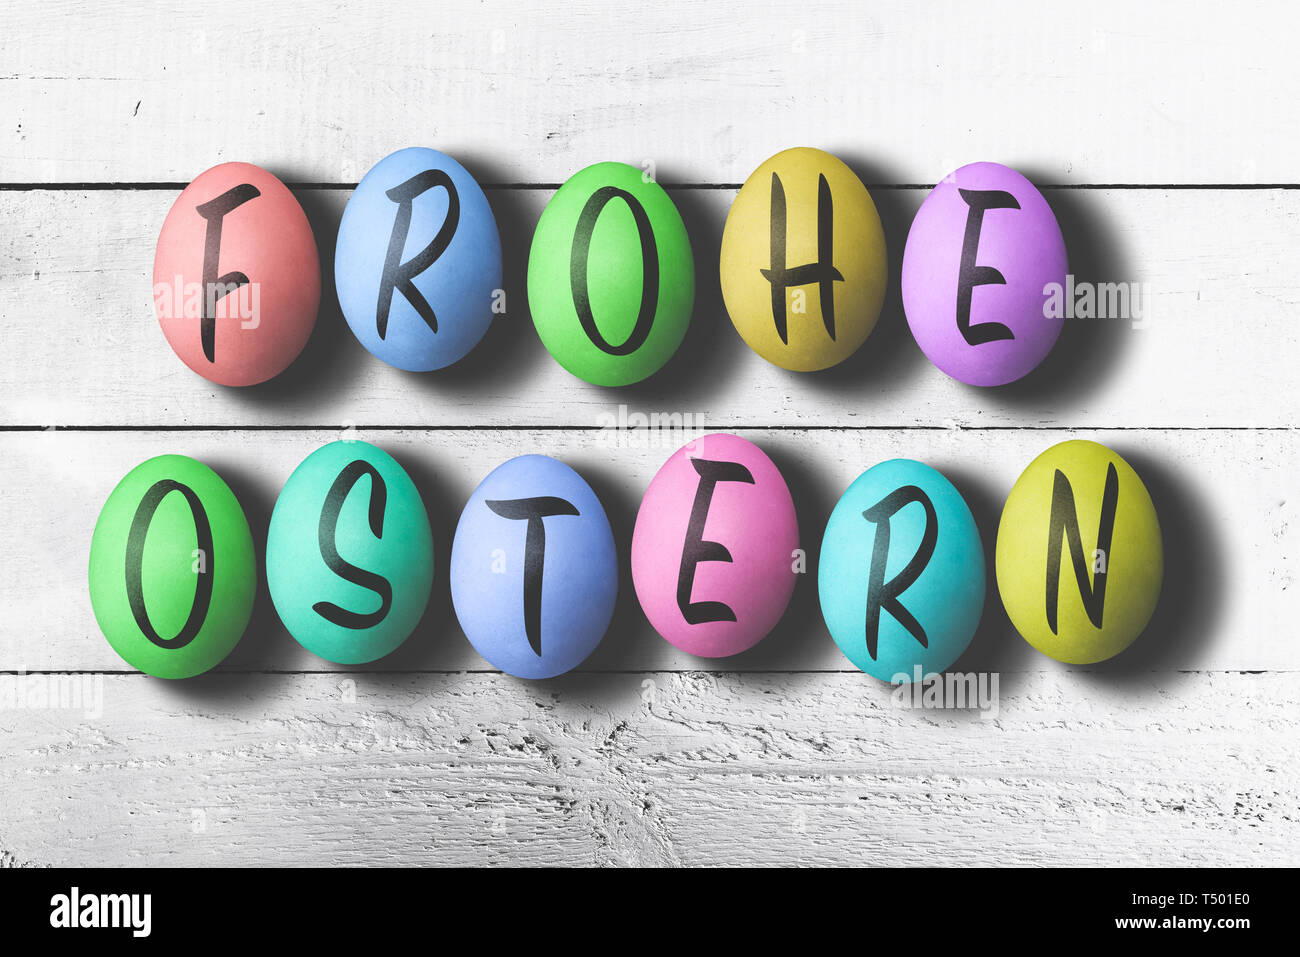 FROHE OSTERN, German for happy easter, written on colored easter eggs against rustic white wooden table Stock Photo